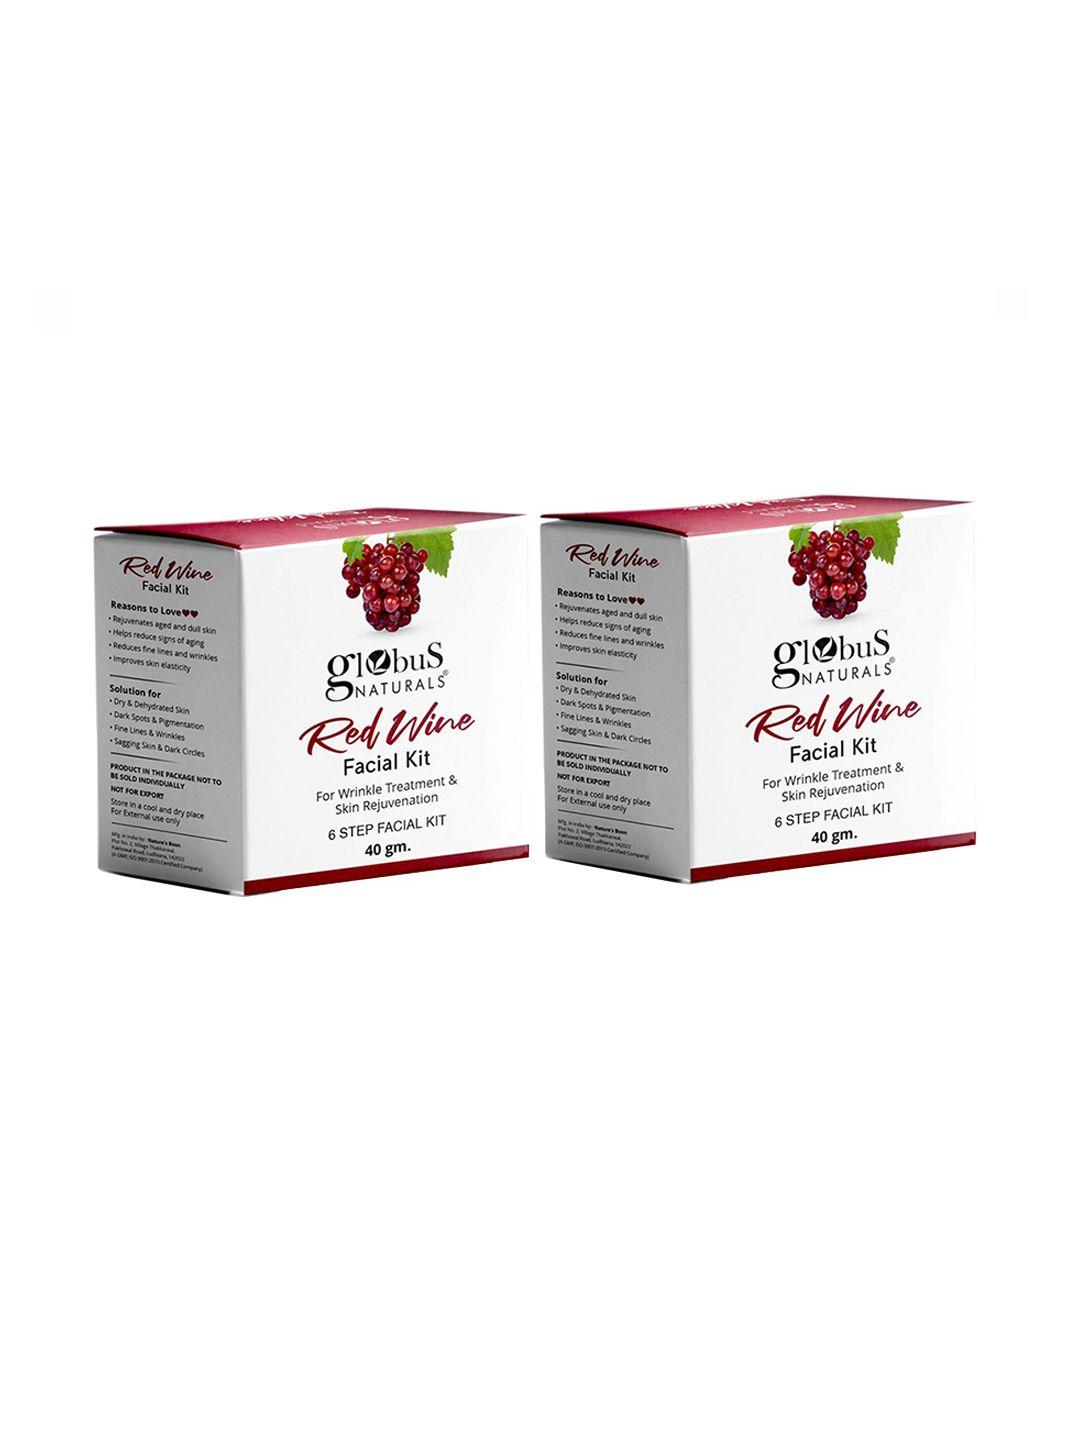 globus naturals red wine set of 2 anti-ageing  6 step facial kits-40gm each